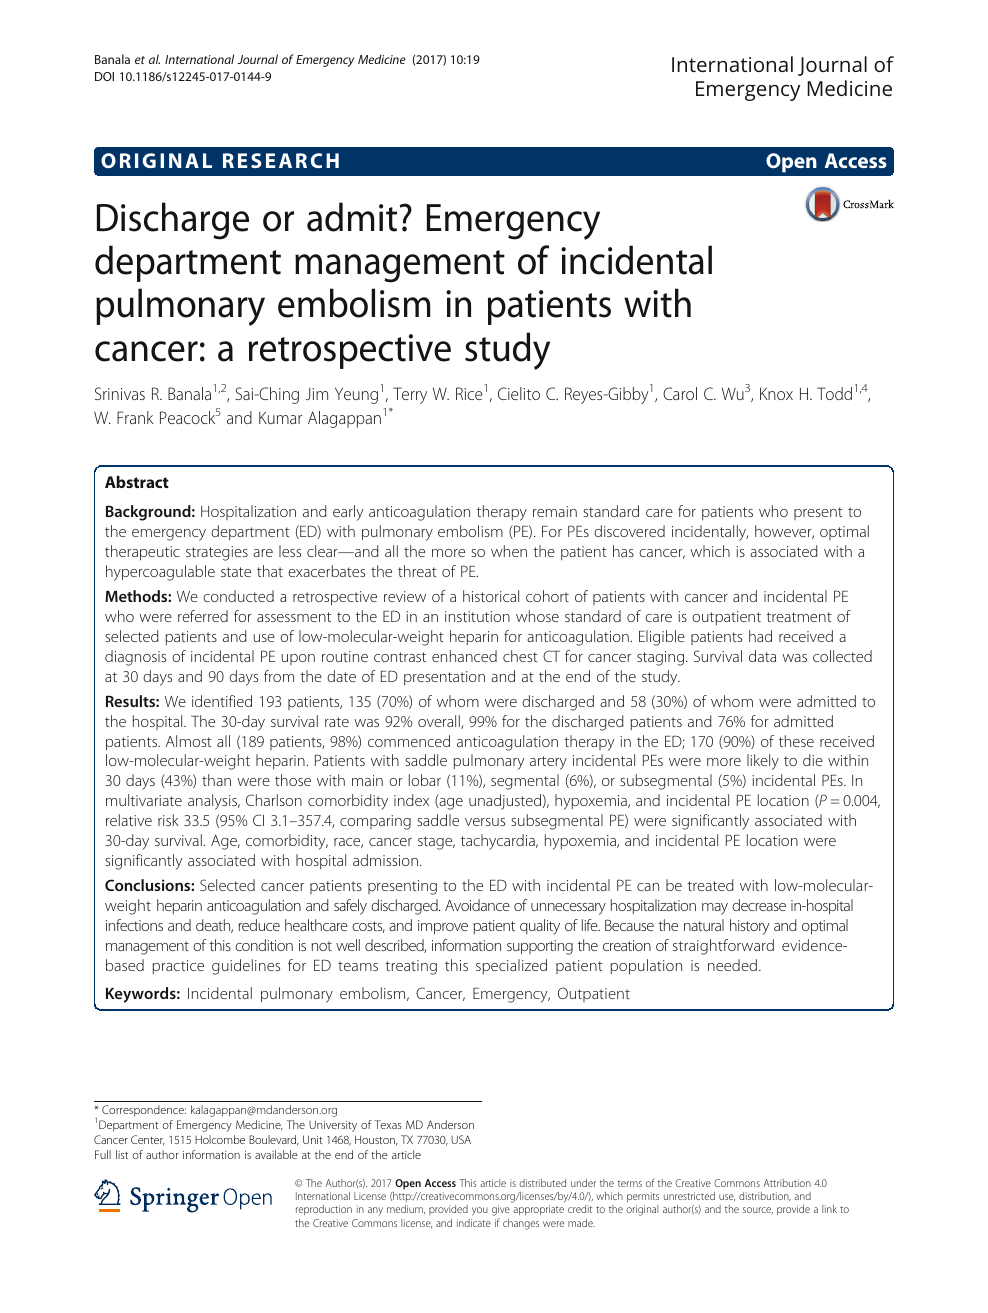 Discharge Or Admit Emergency Department Management Of